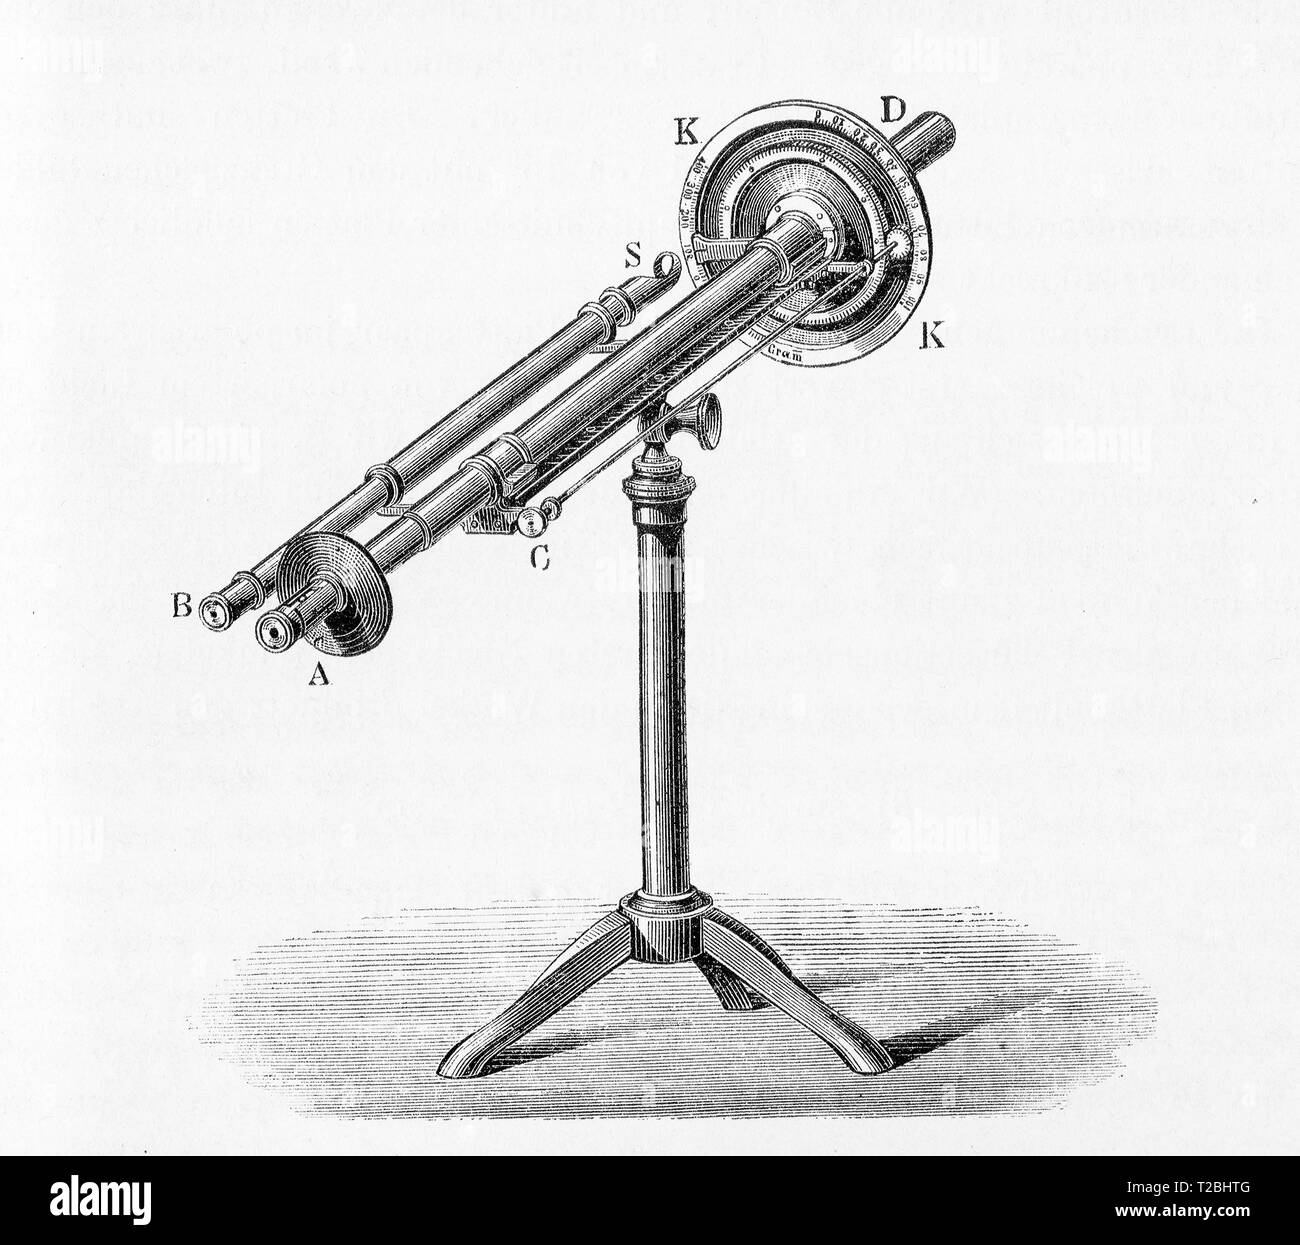 chemistry polaristrobometer the first practical and commercially successful polarimeter saccharimeter using monochromatic light produced by heinrich von wild 1833 1902 swiss physics professor at bern university T2BHTG